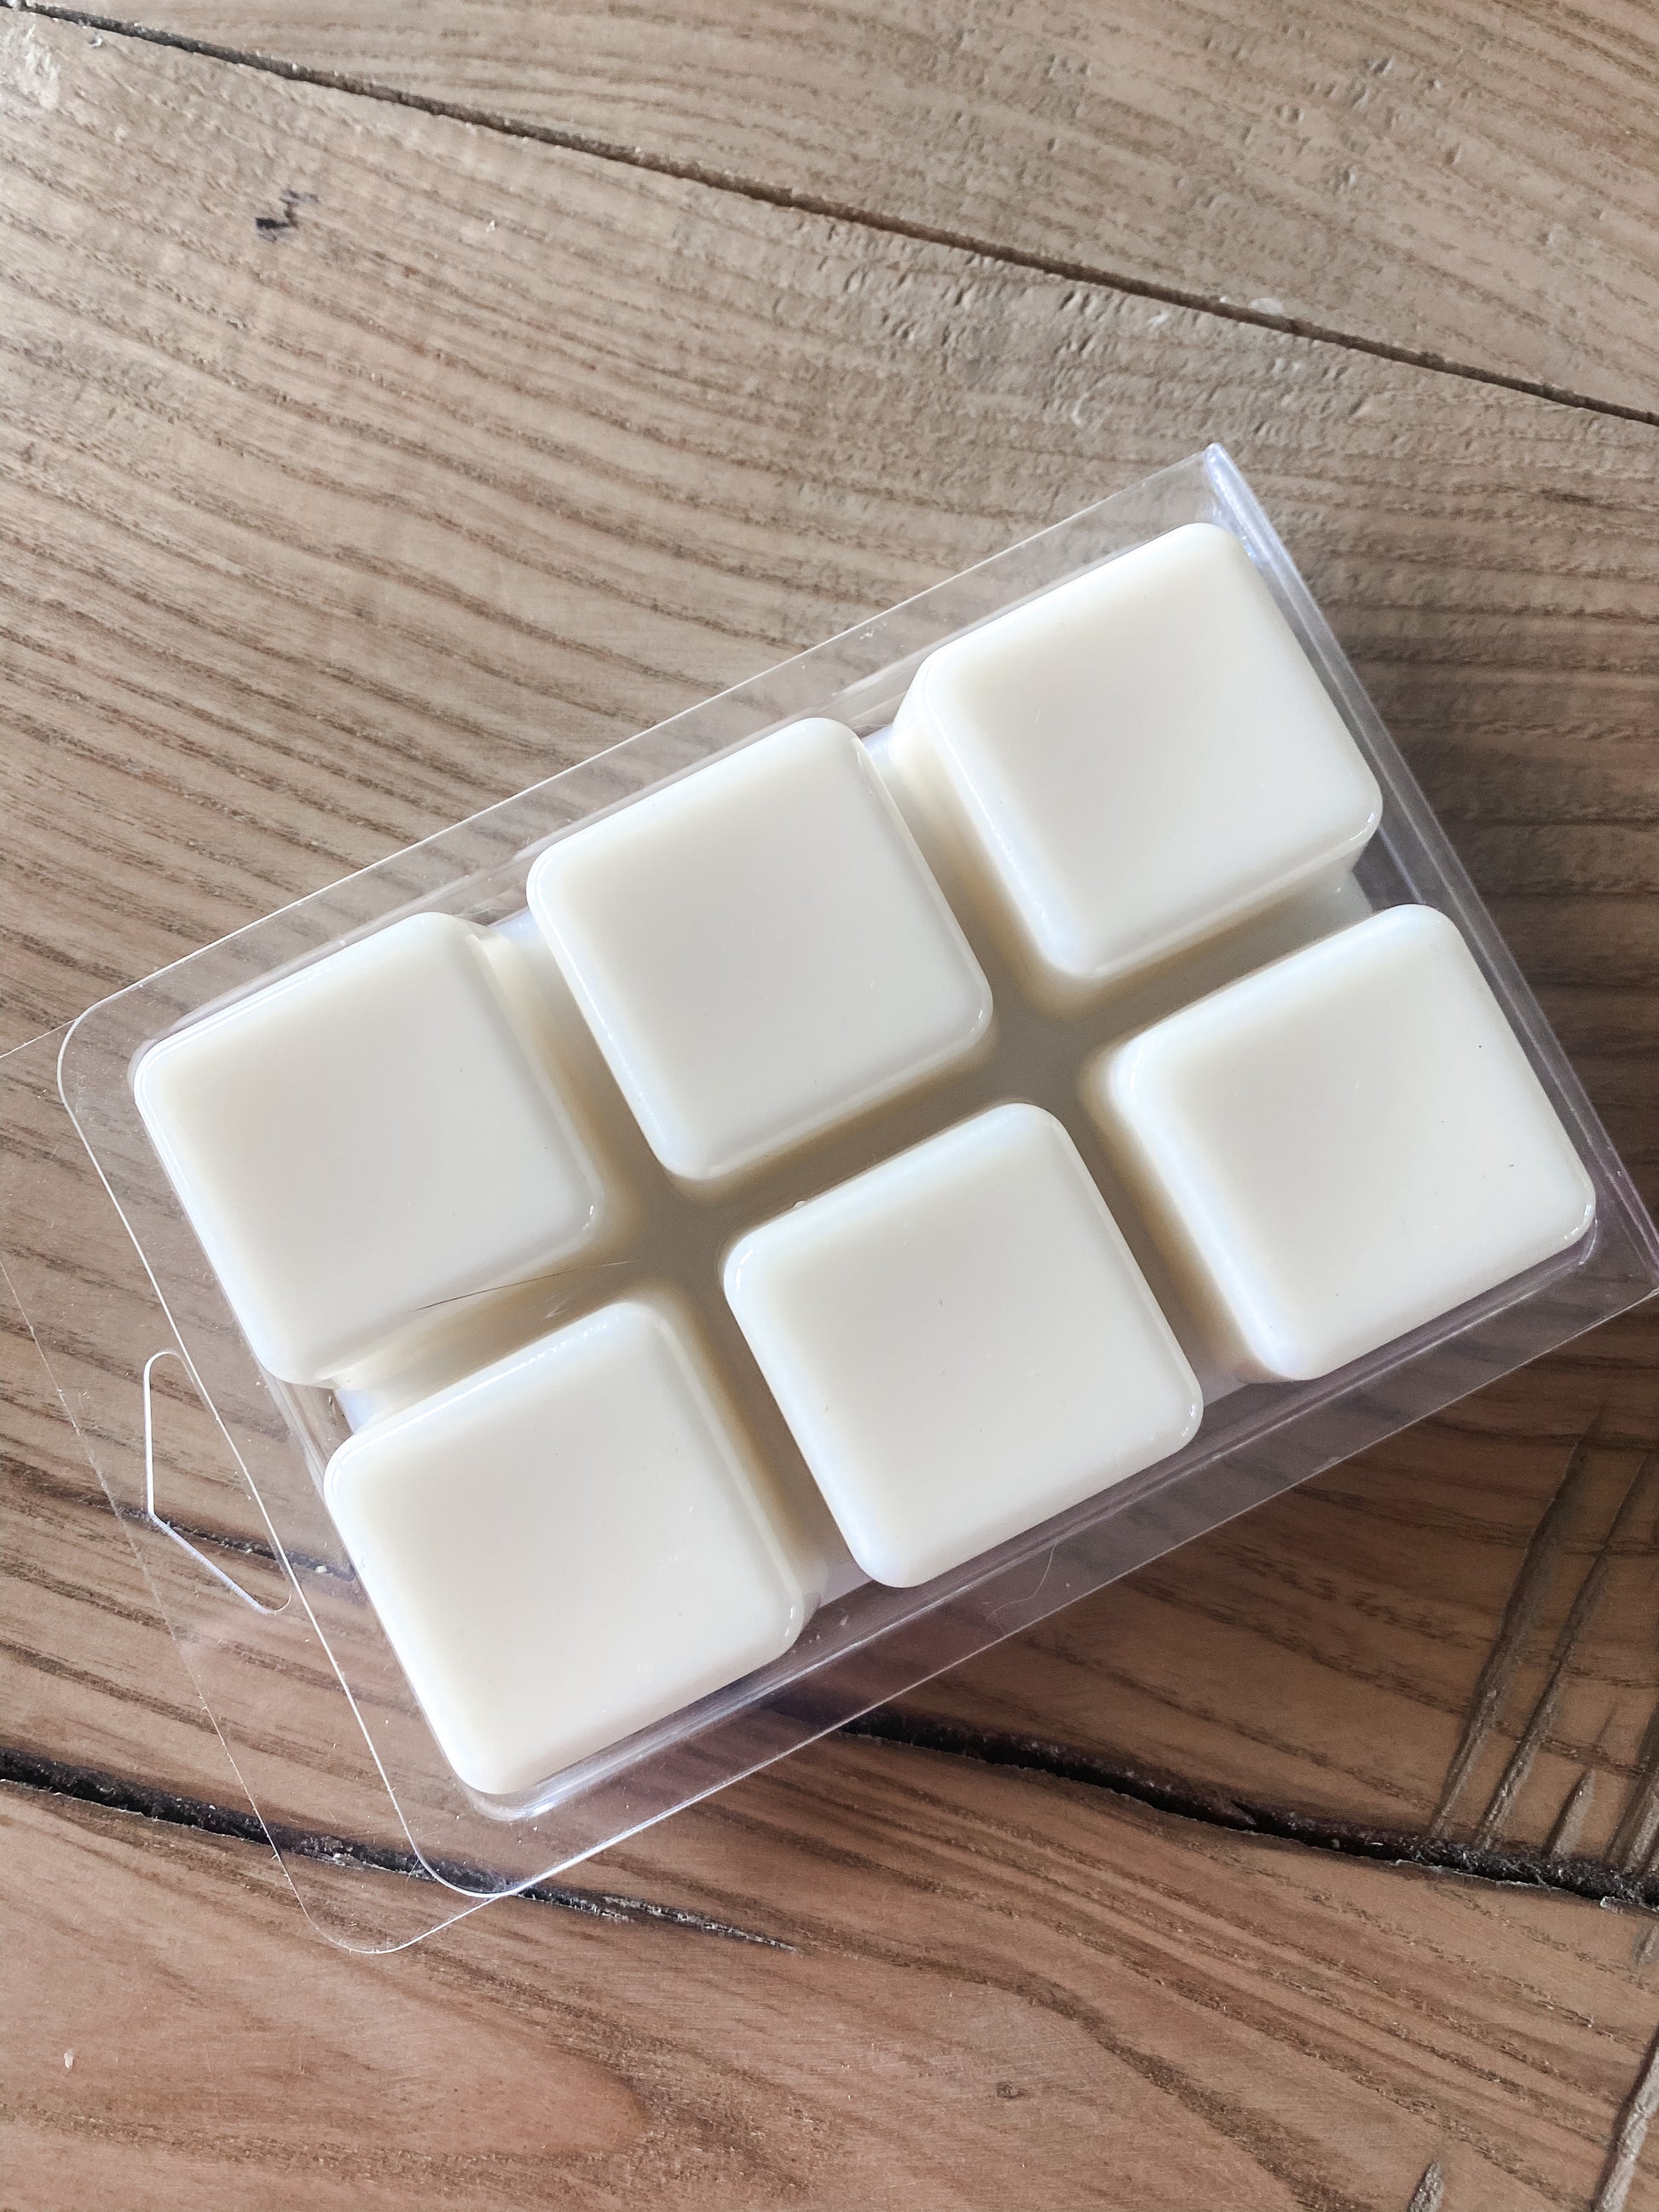 30 Pcs White Kraft Box With Crystal Clear Clamshell for Wax Melts Clamshells  for Wax Melts Wax Melt Clamshells 6 Cavity 